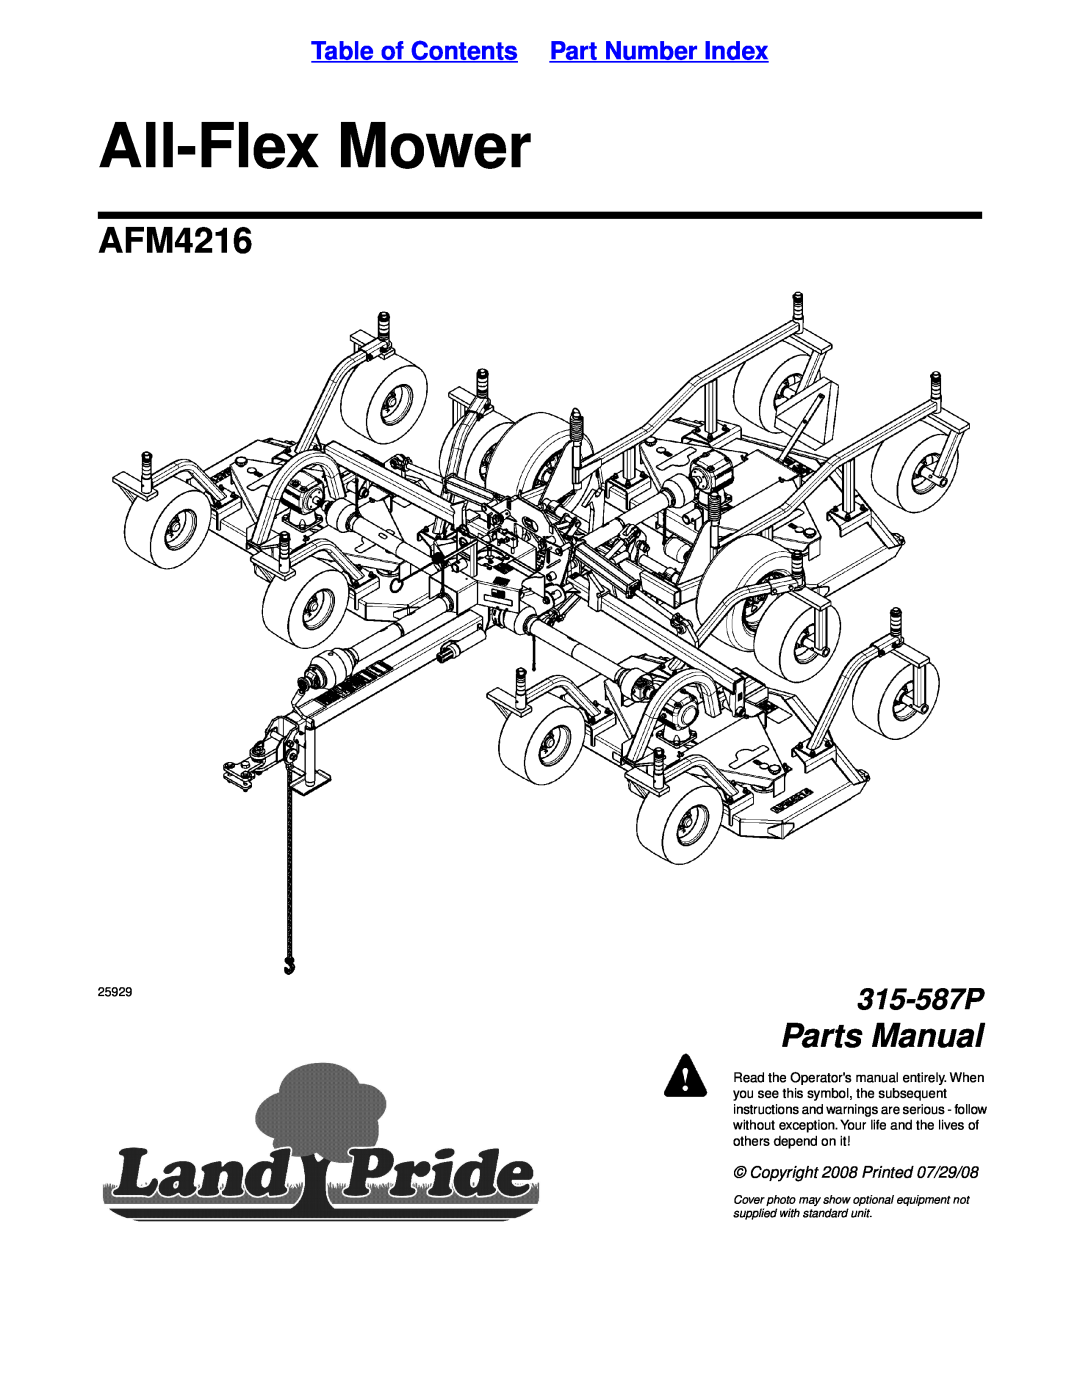 Land Pride AFM4216 manual Table of Contents Part Number Index, All-FlexMower, Parts Manual, 315-587P, others depend on it 